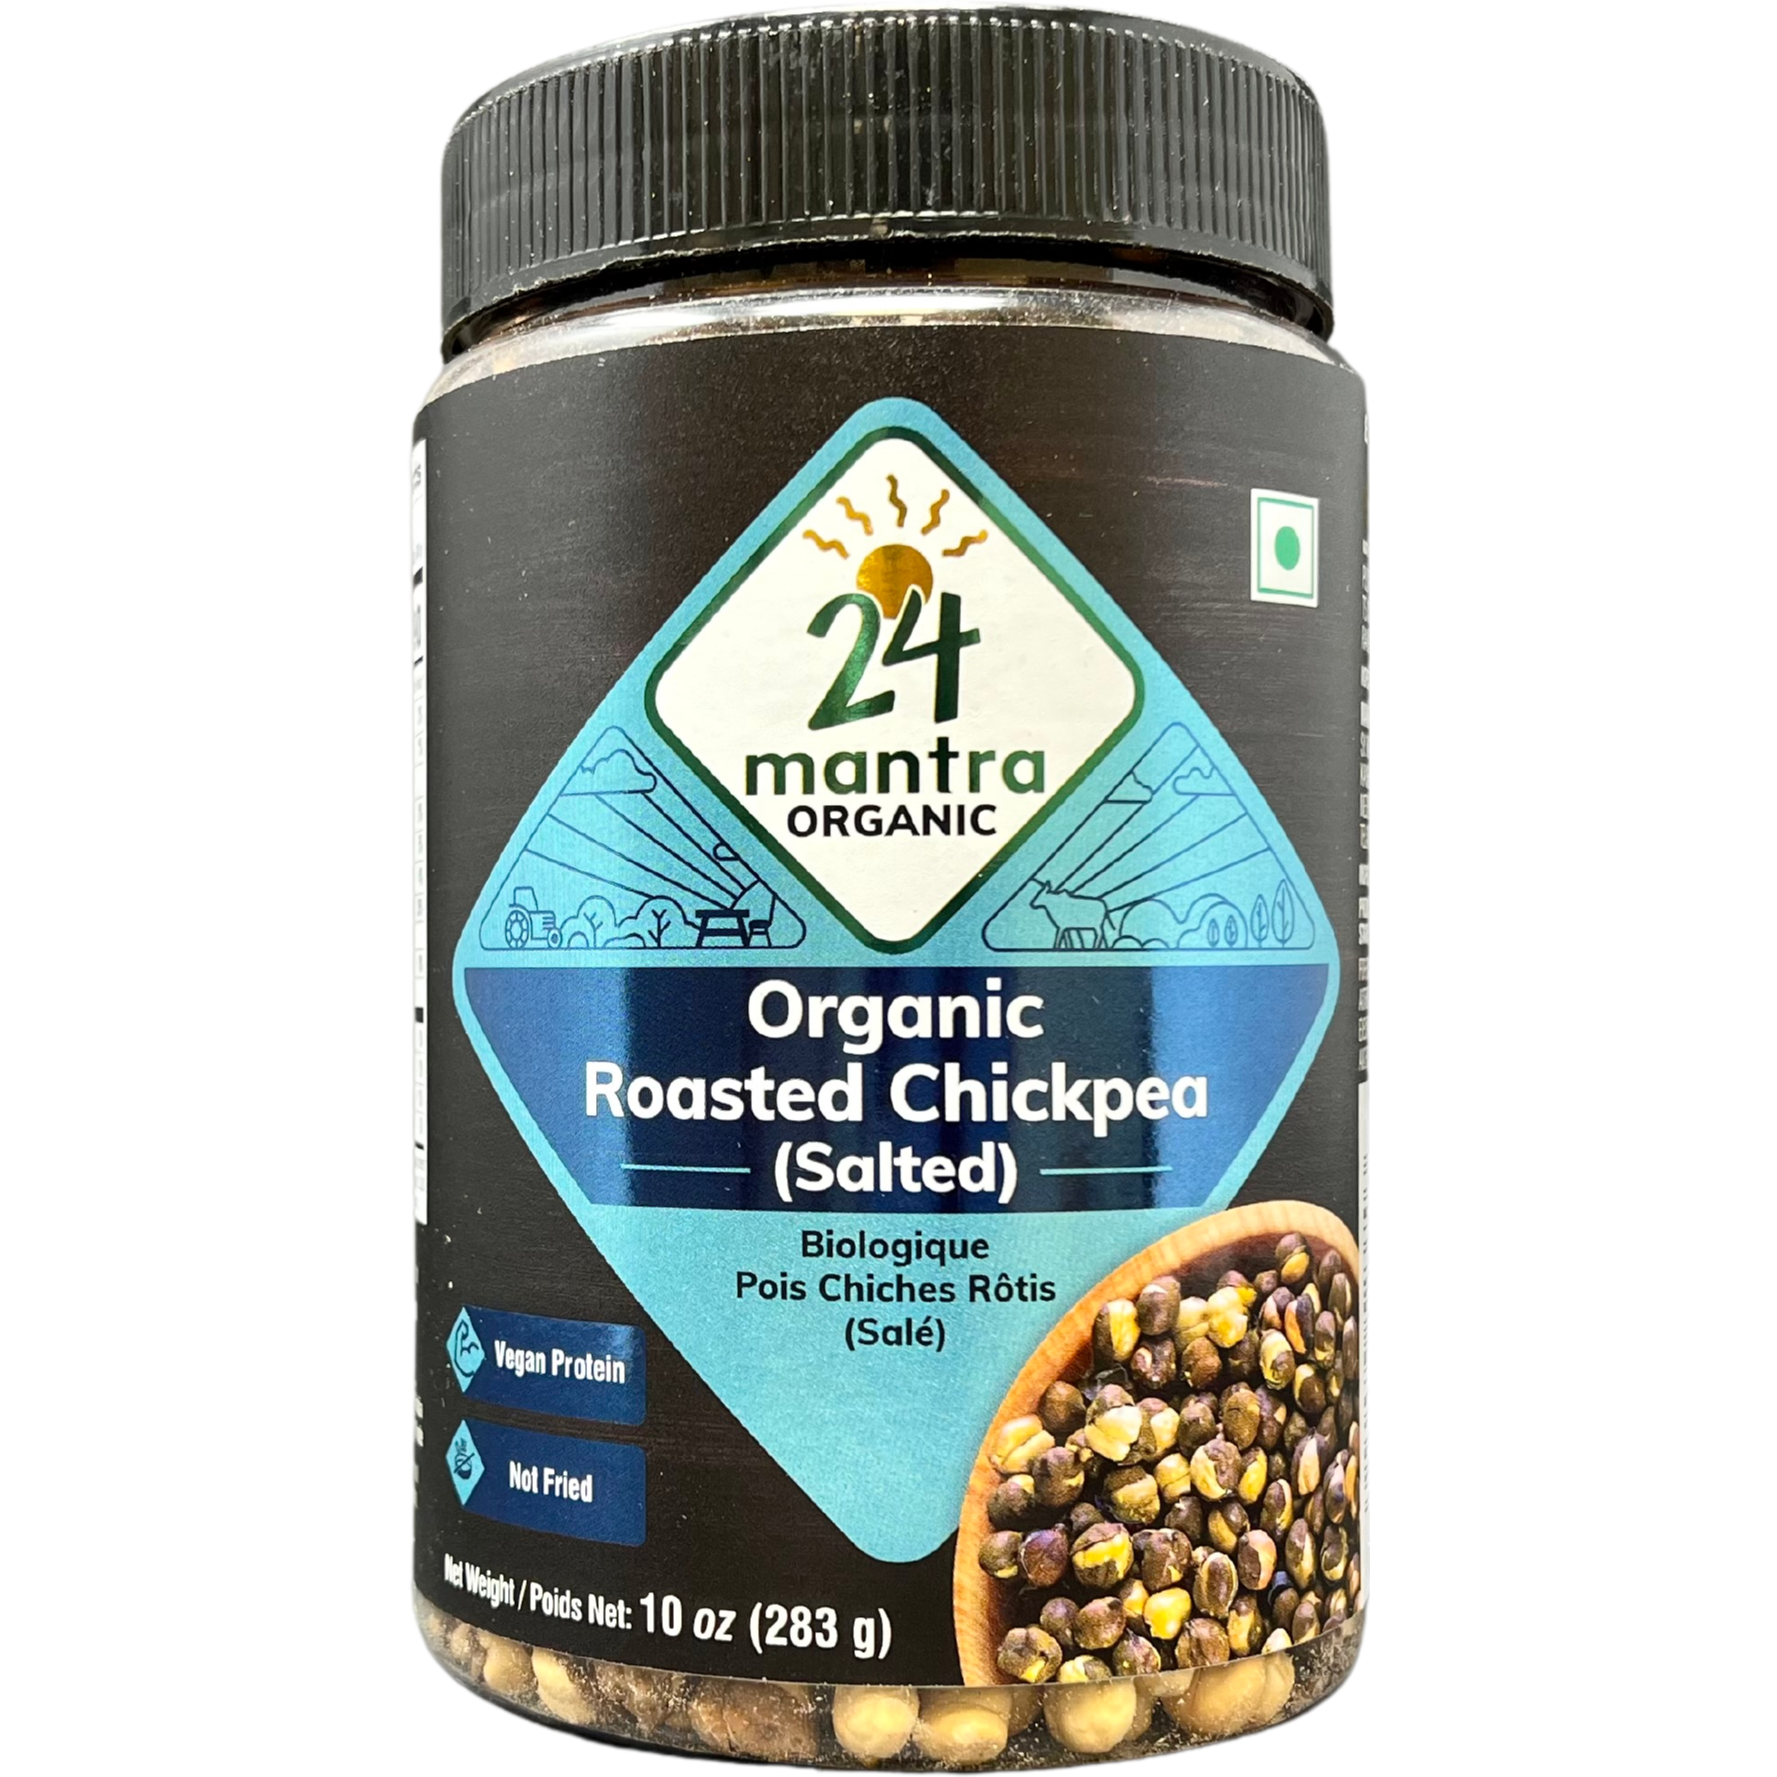 Case of 15 - 24 Mantra Organic Roasted Chickpea Salted - 10 Oz (283 Gm)